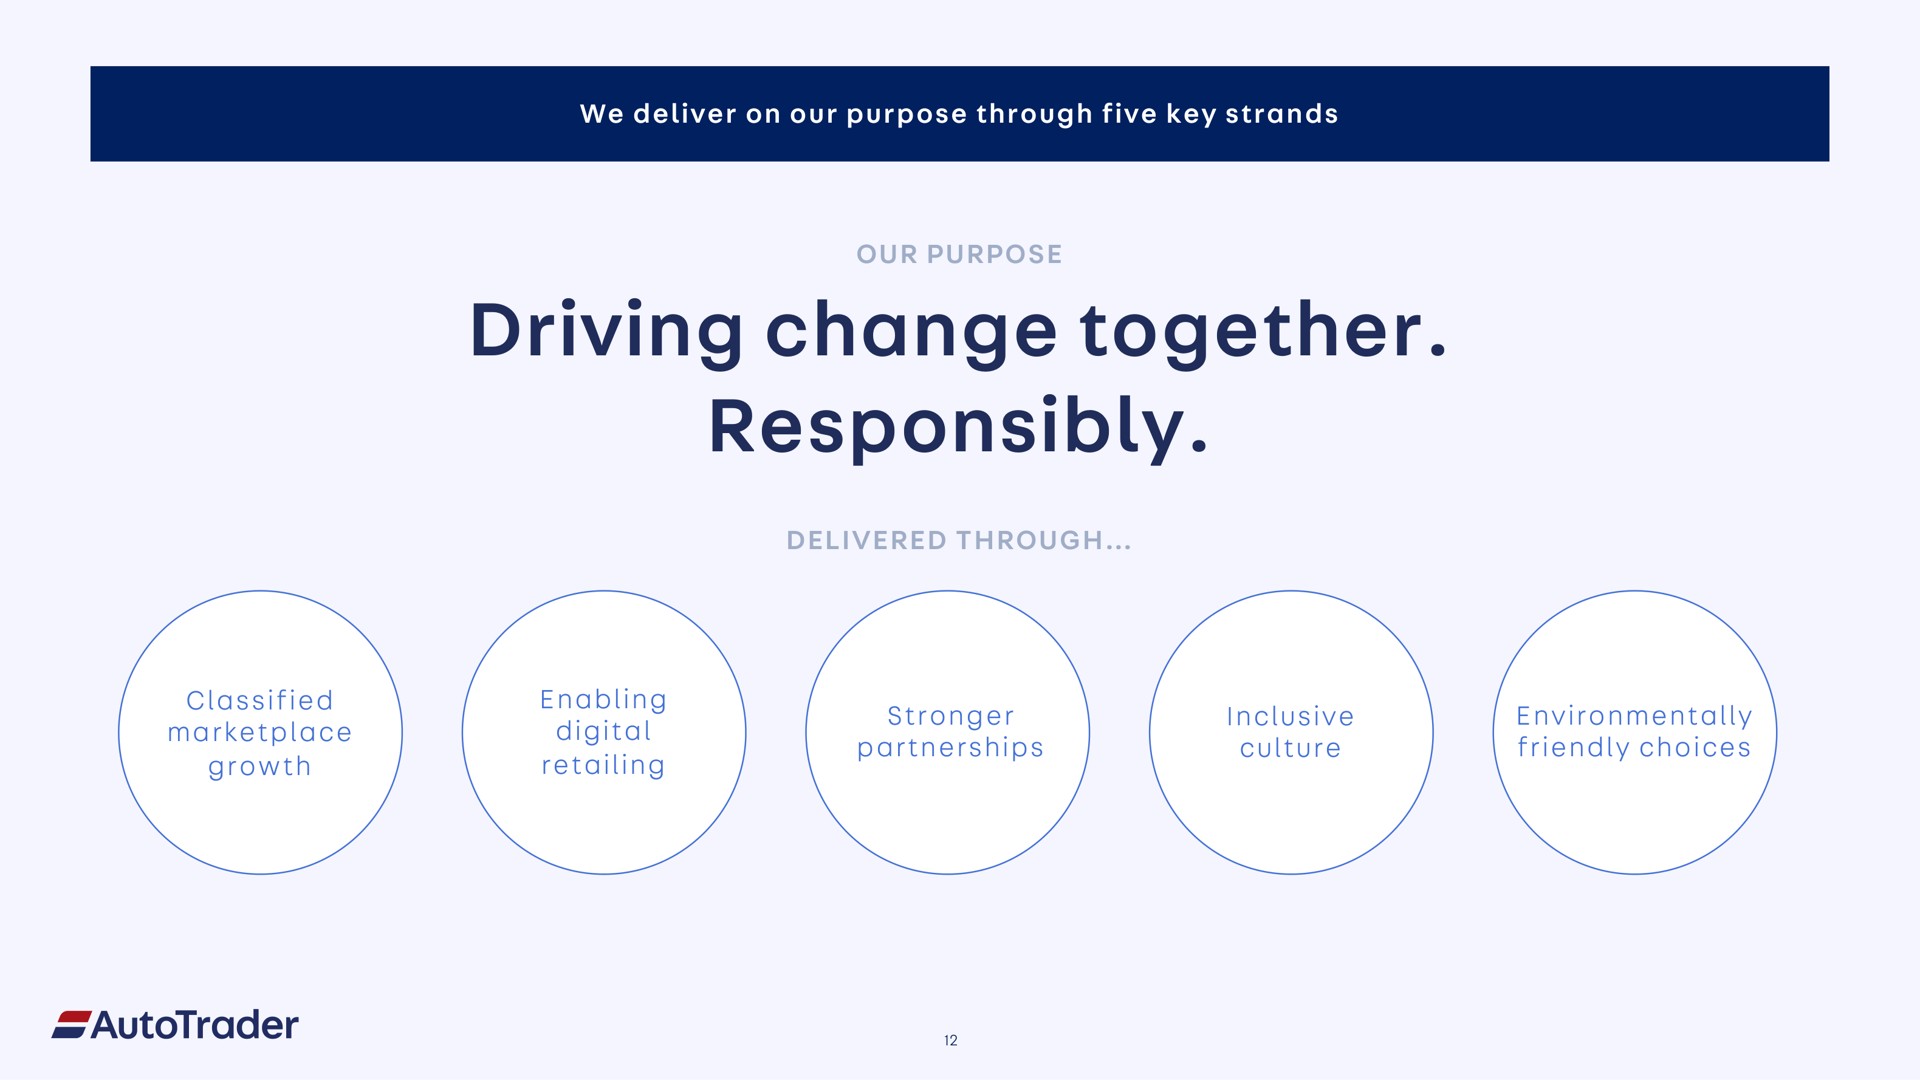 we deliver on our purpose through five key strands our purpose driving change together responsibly delivered through classified growth enabling digital retailing partnerships inclusive culture environmentally friendly choices a | Auto Trader Group